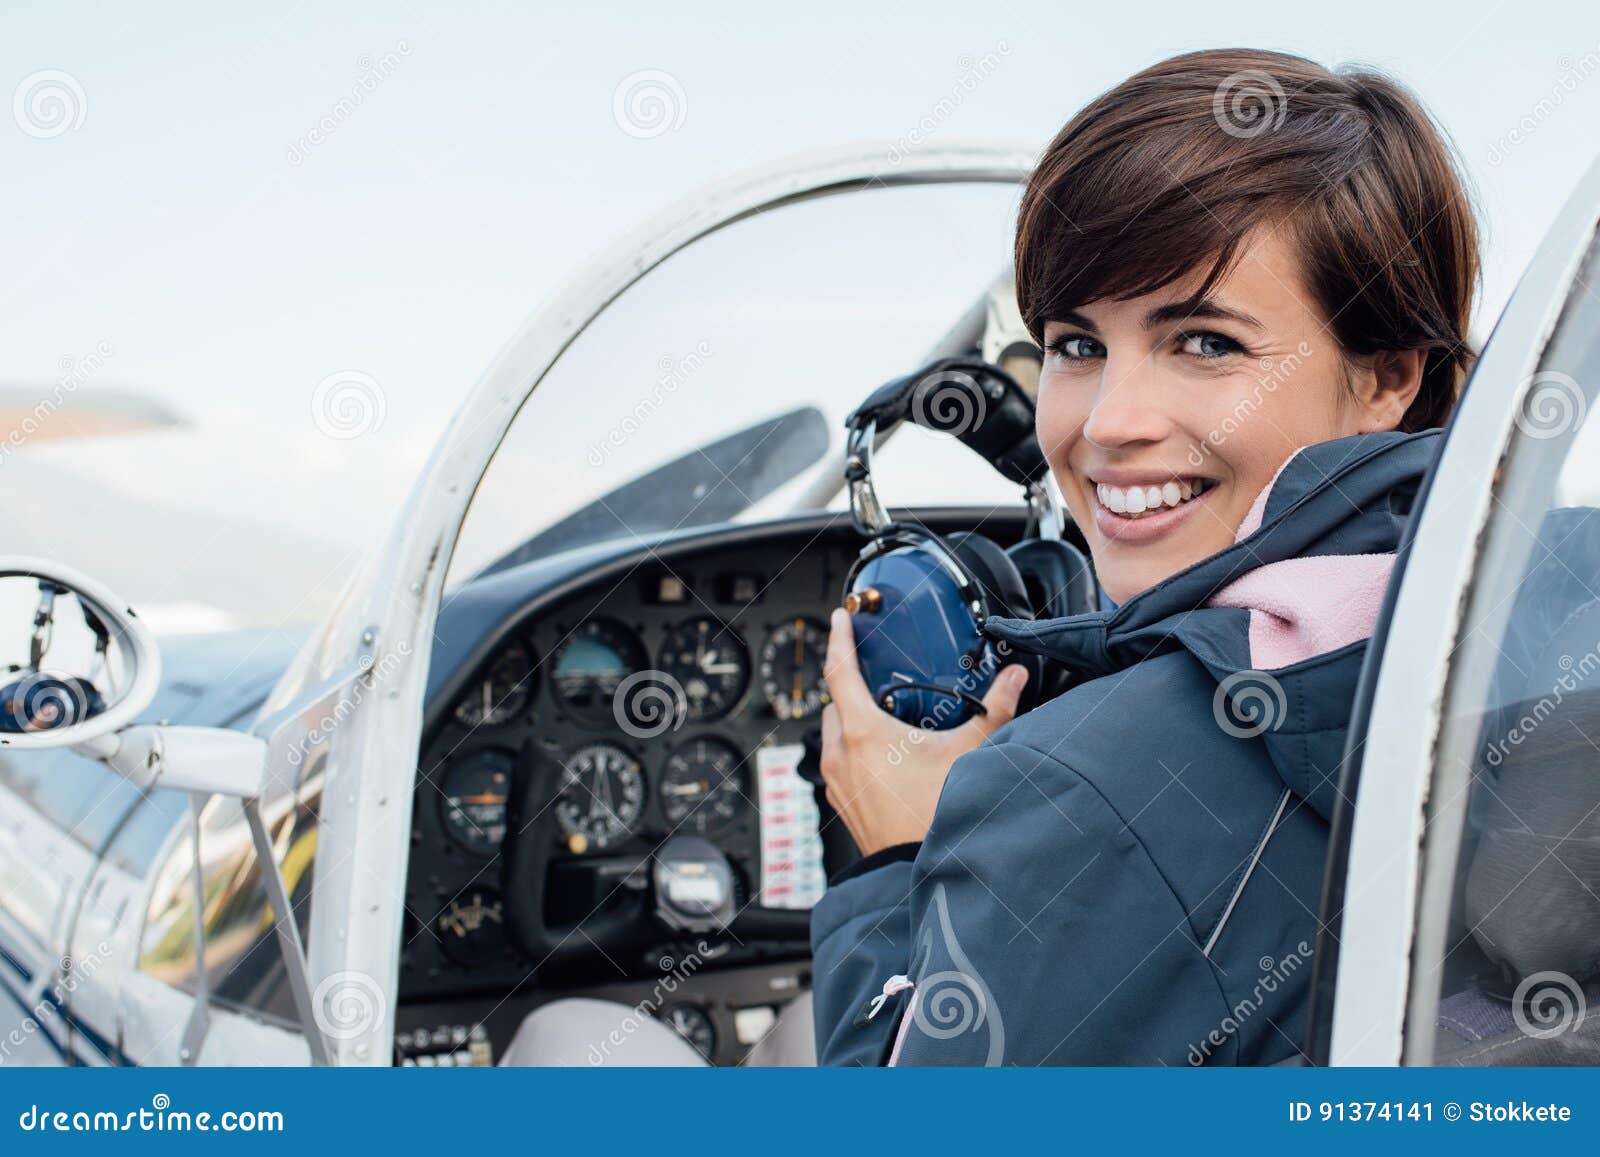 pilot in the aircraft cockpit